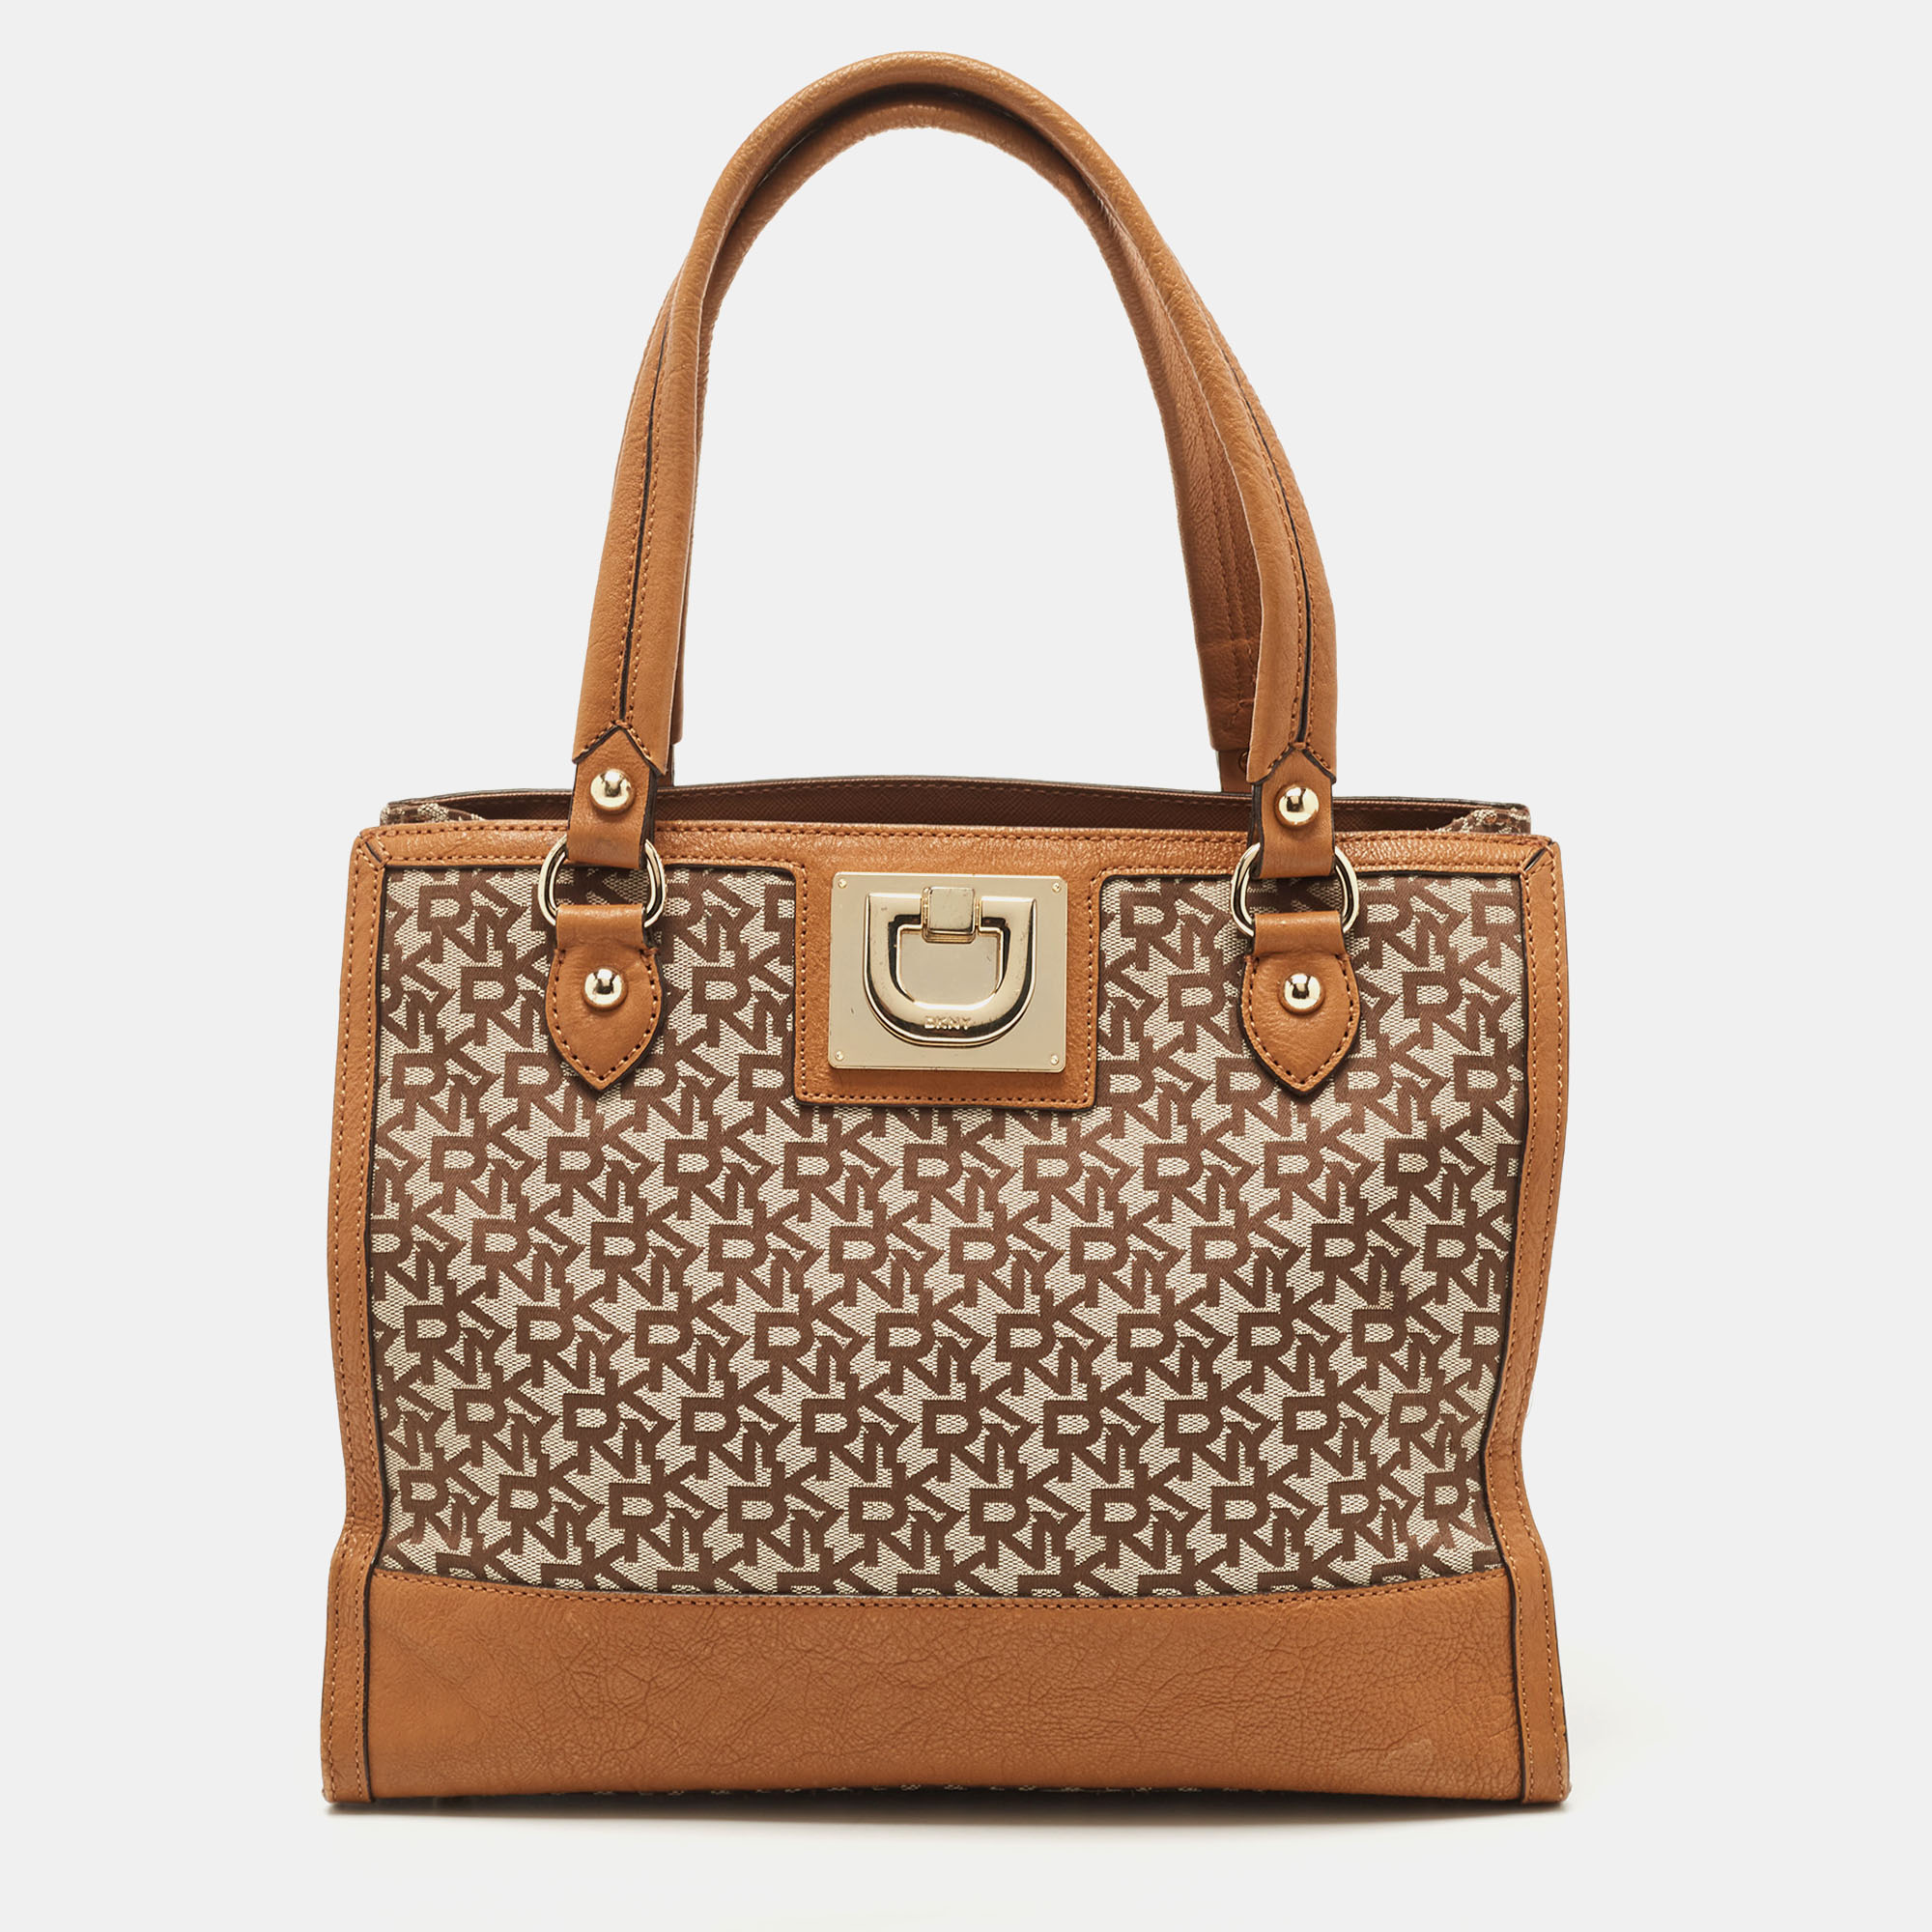 Stylish Cream Leather Tote by DKNY